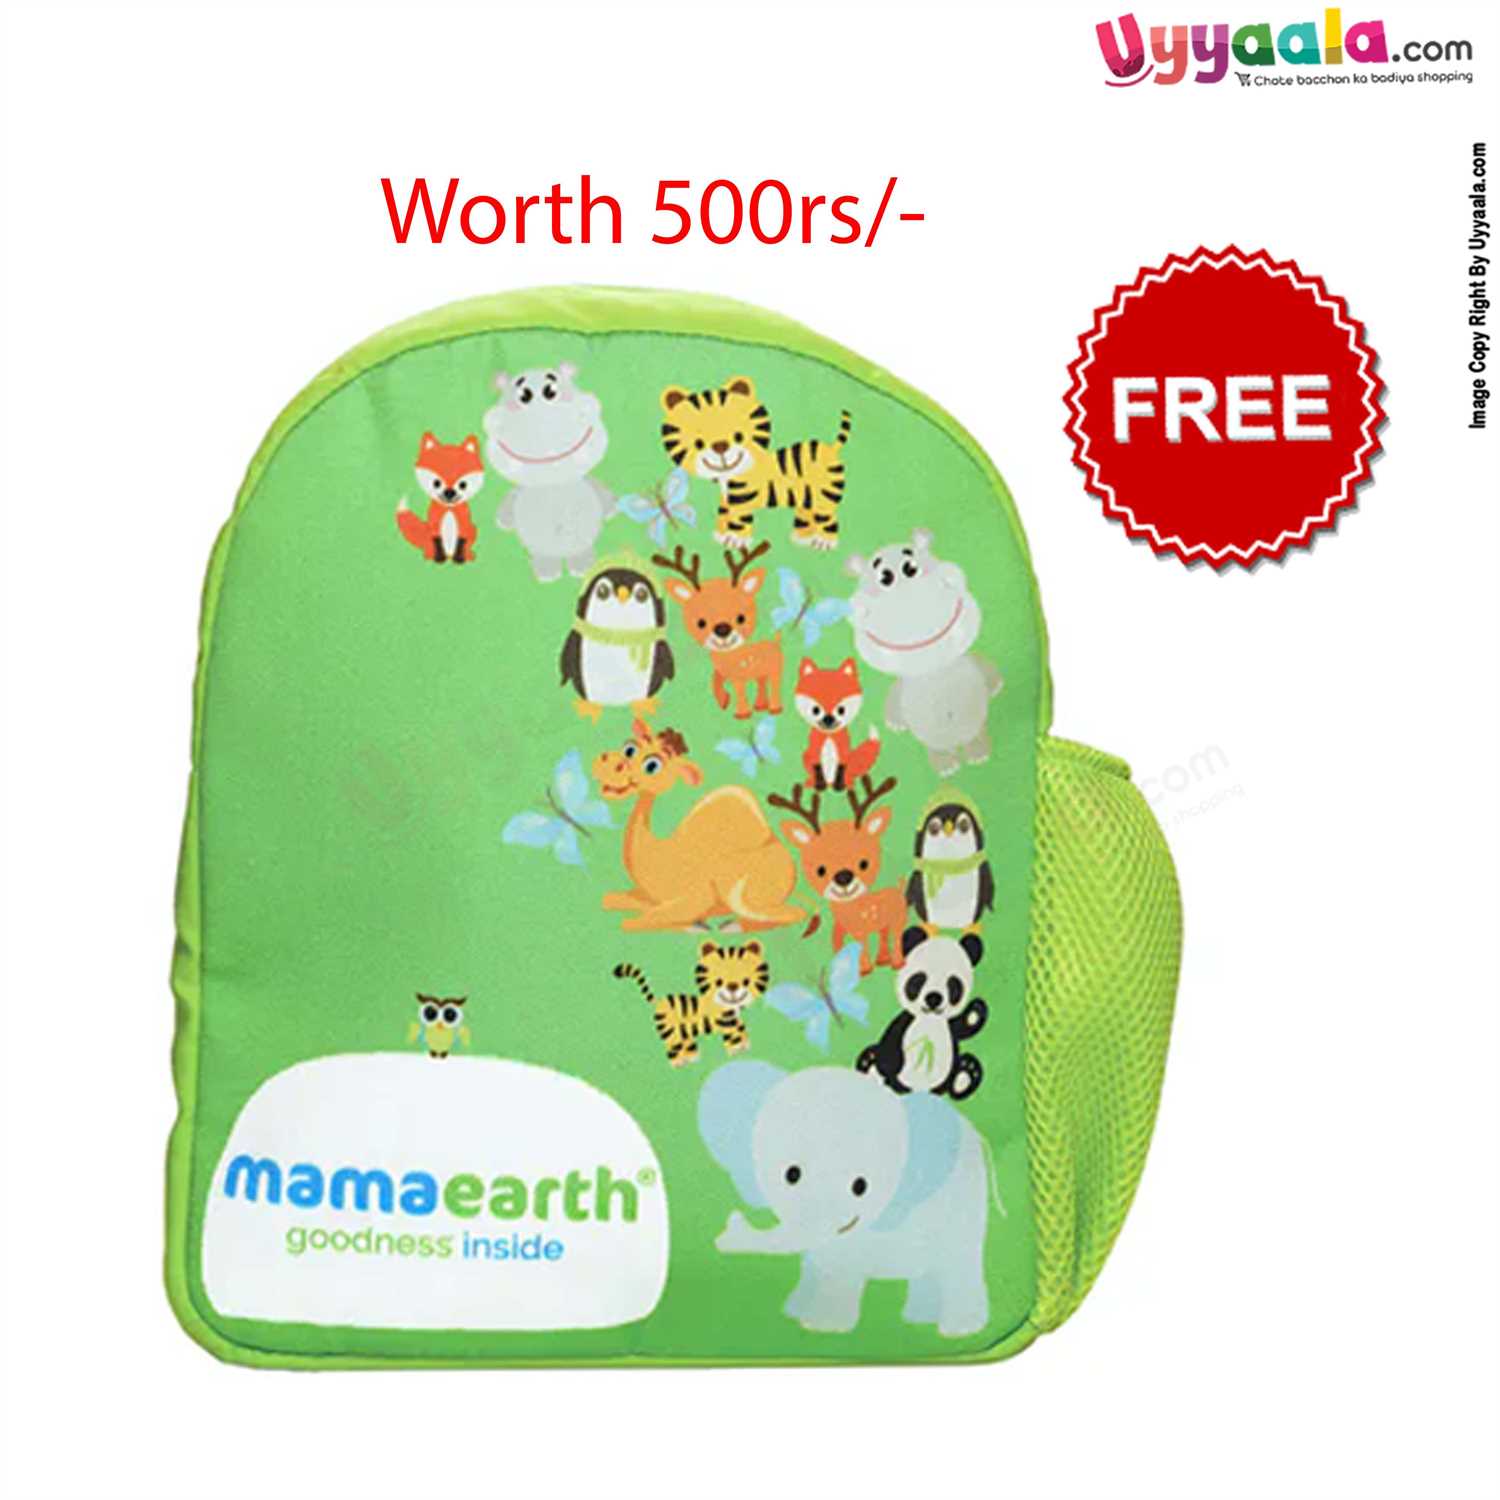 Mamaearth's Baby Summer Care Value Kit with Free Smart Bag Back Pack